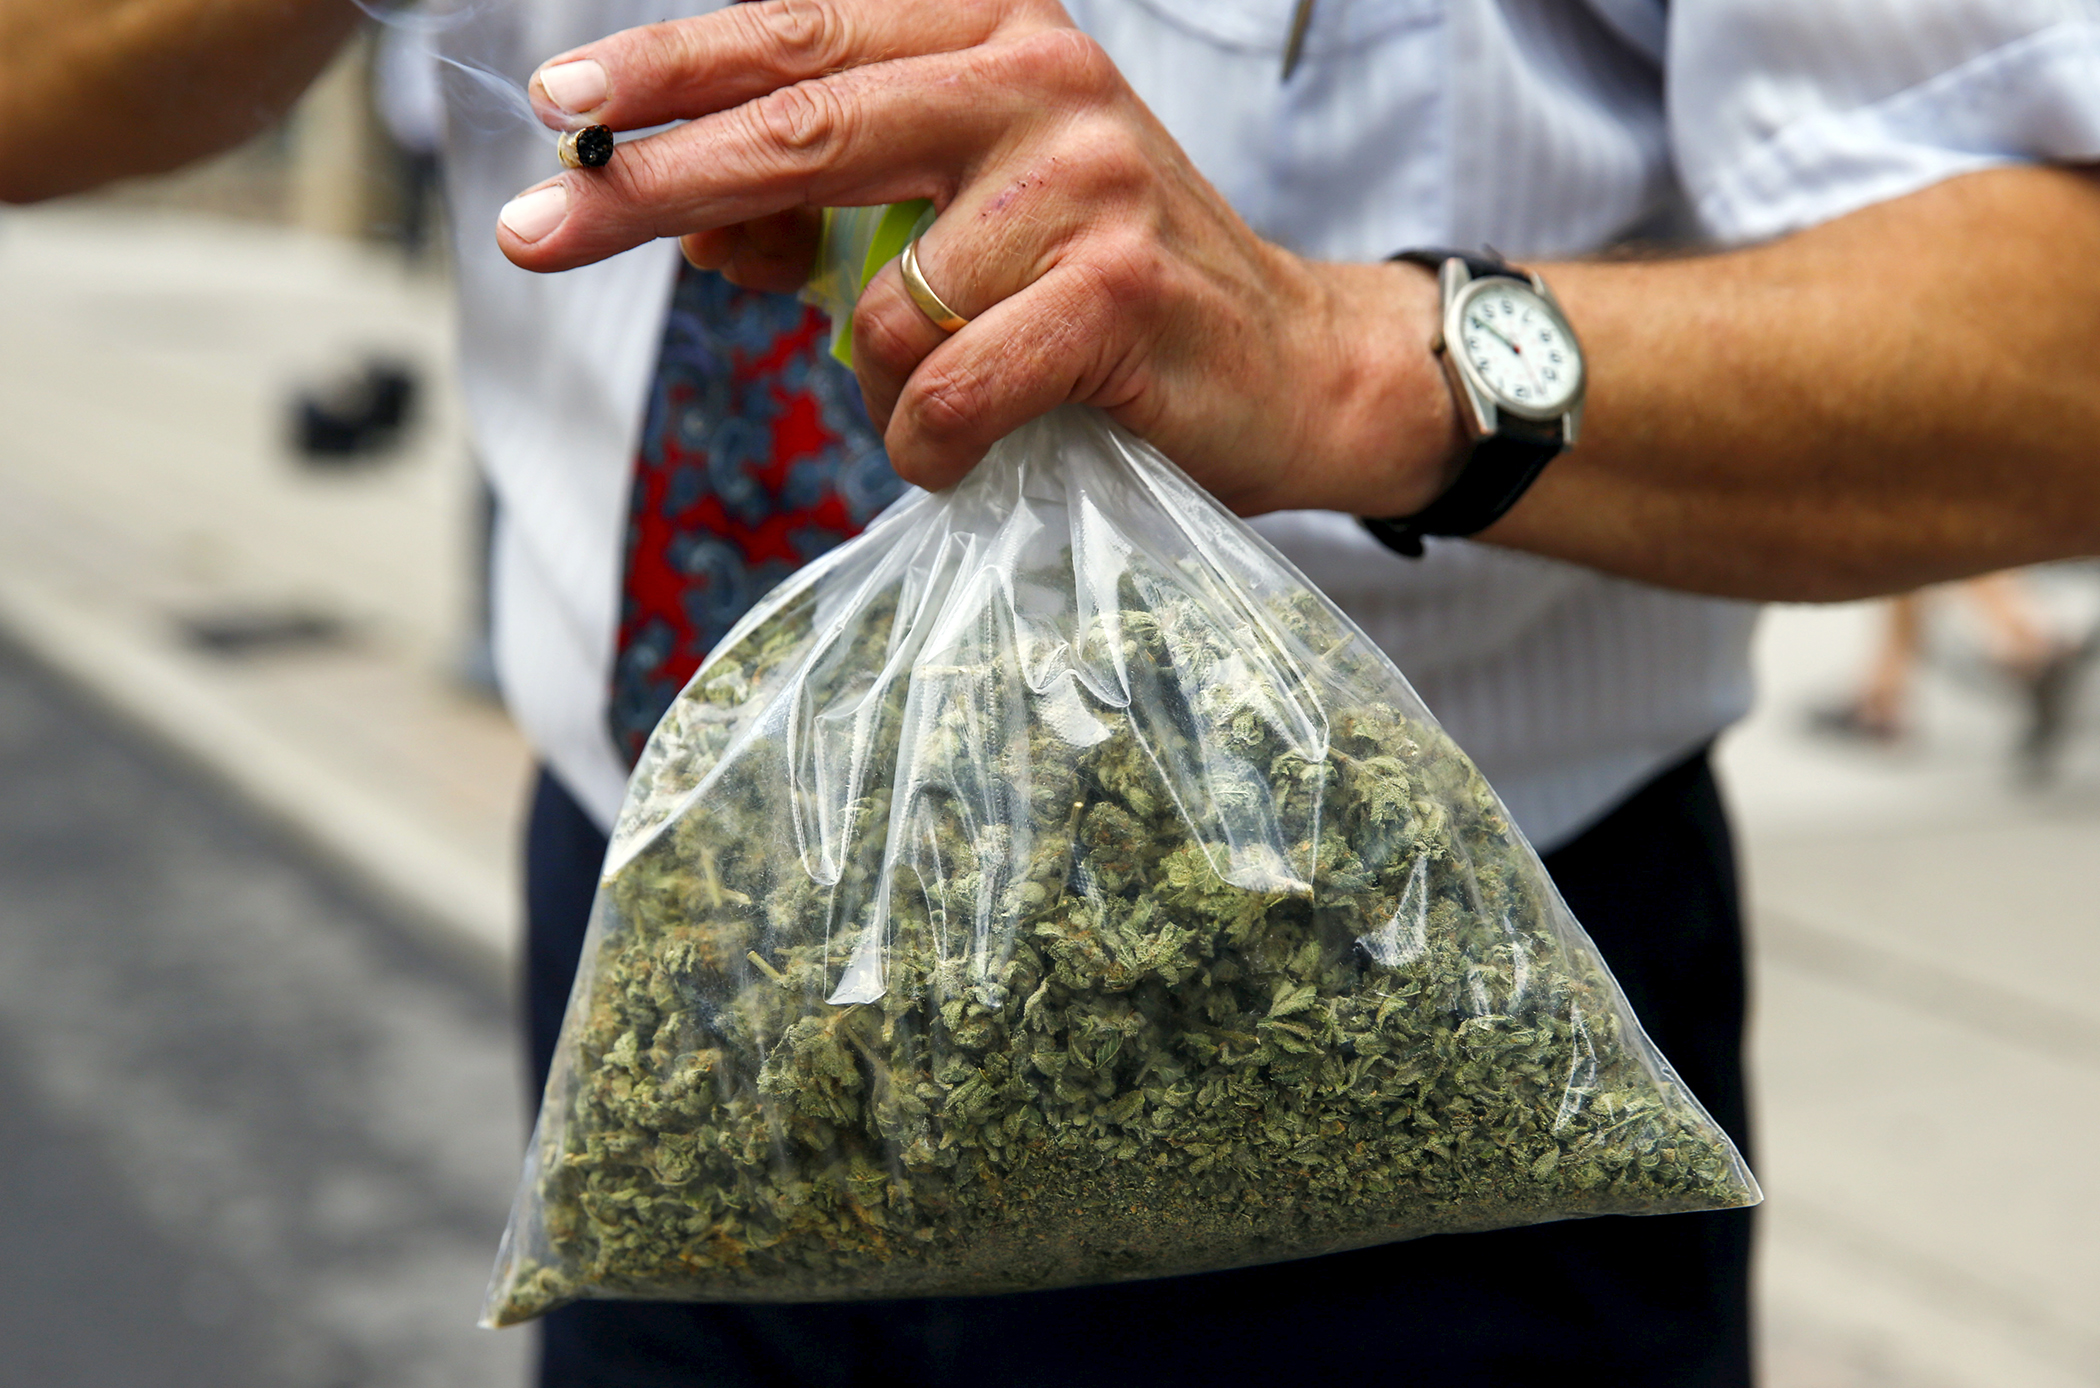 Activist Ray Turmel holds a bag of medical marijuana while he smokes a marijuana cigarette, as he calls for the total legalization of marijuana, outside the building where the federal election Munk Debate on Canadaís Foreign Policy is being held in Toronto, Canada September 28, 2015.